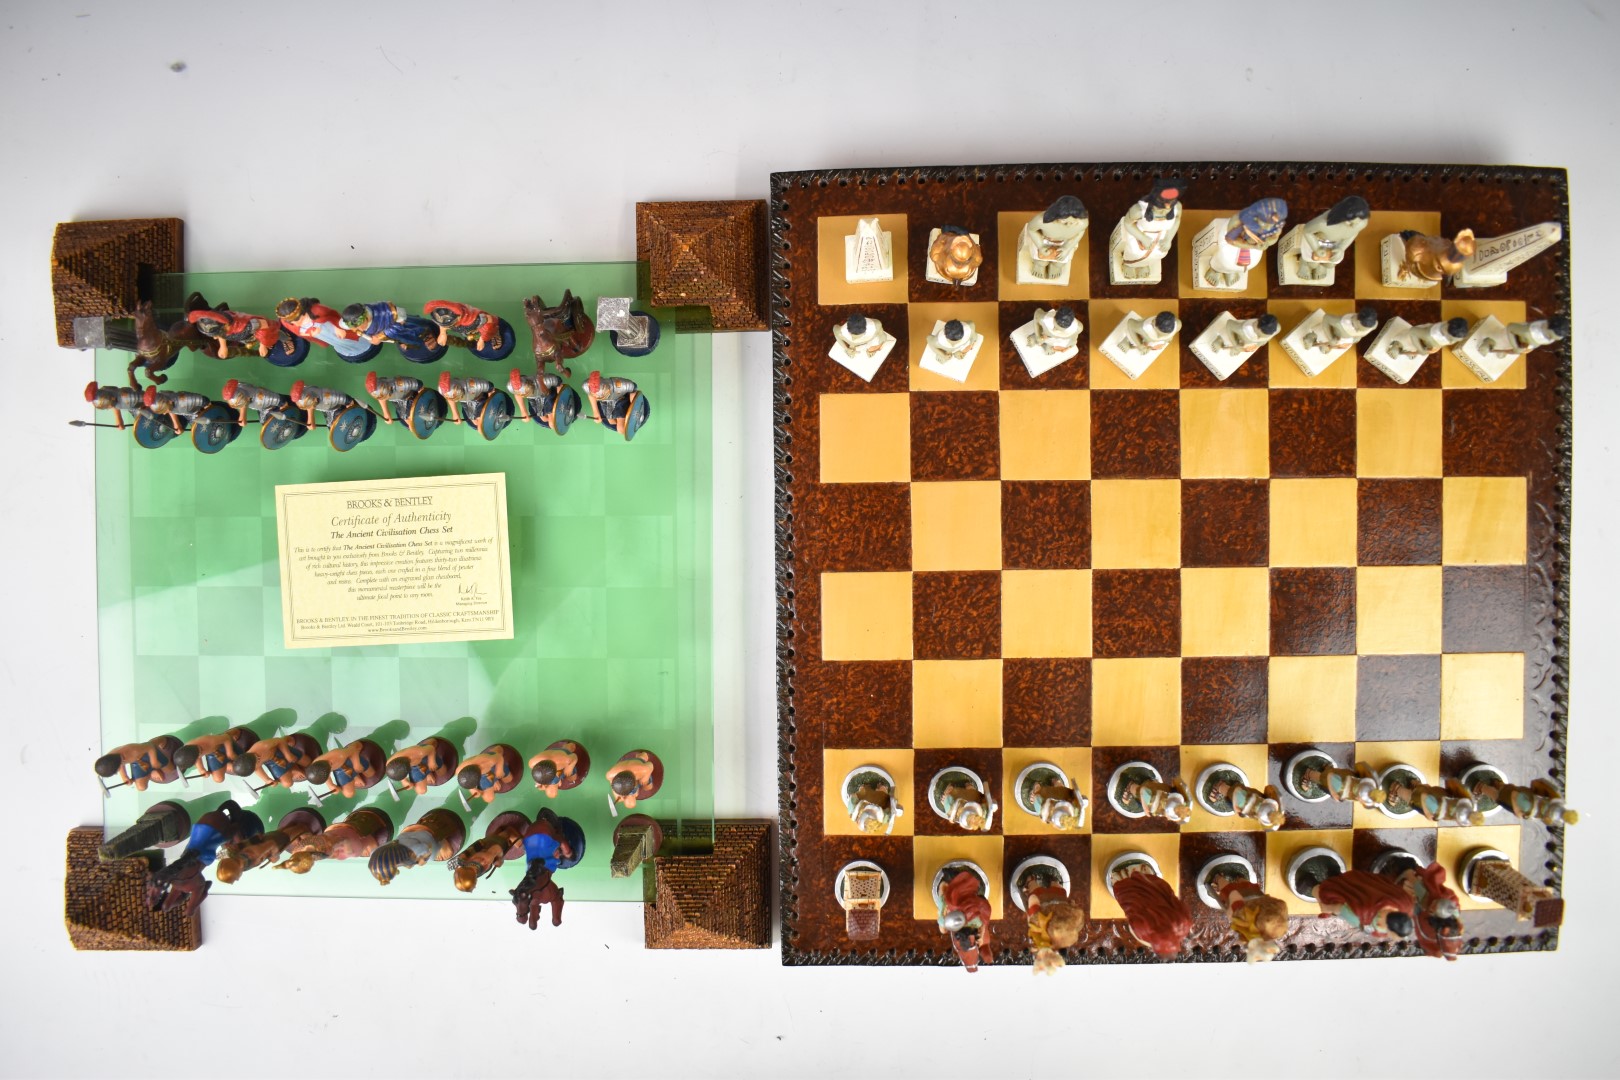 Two Brooks & Bentley chess sets with Egyptian and Roman figures, one with lead style pieces the